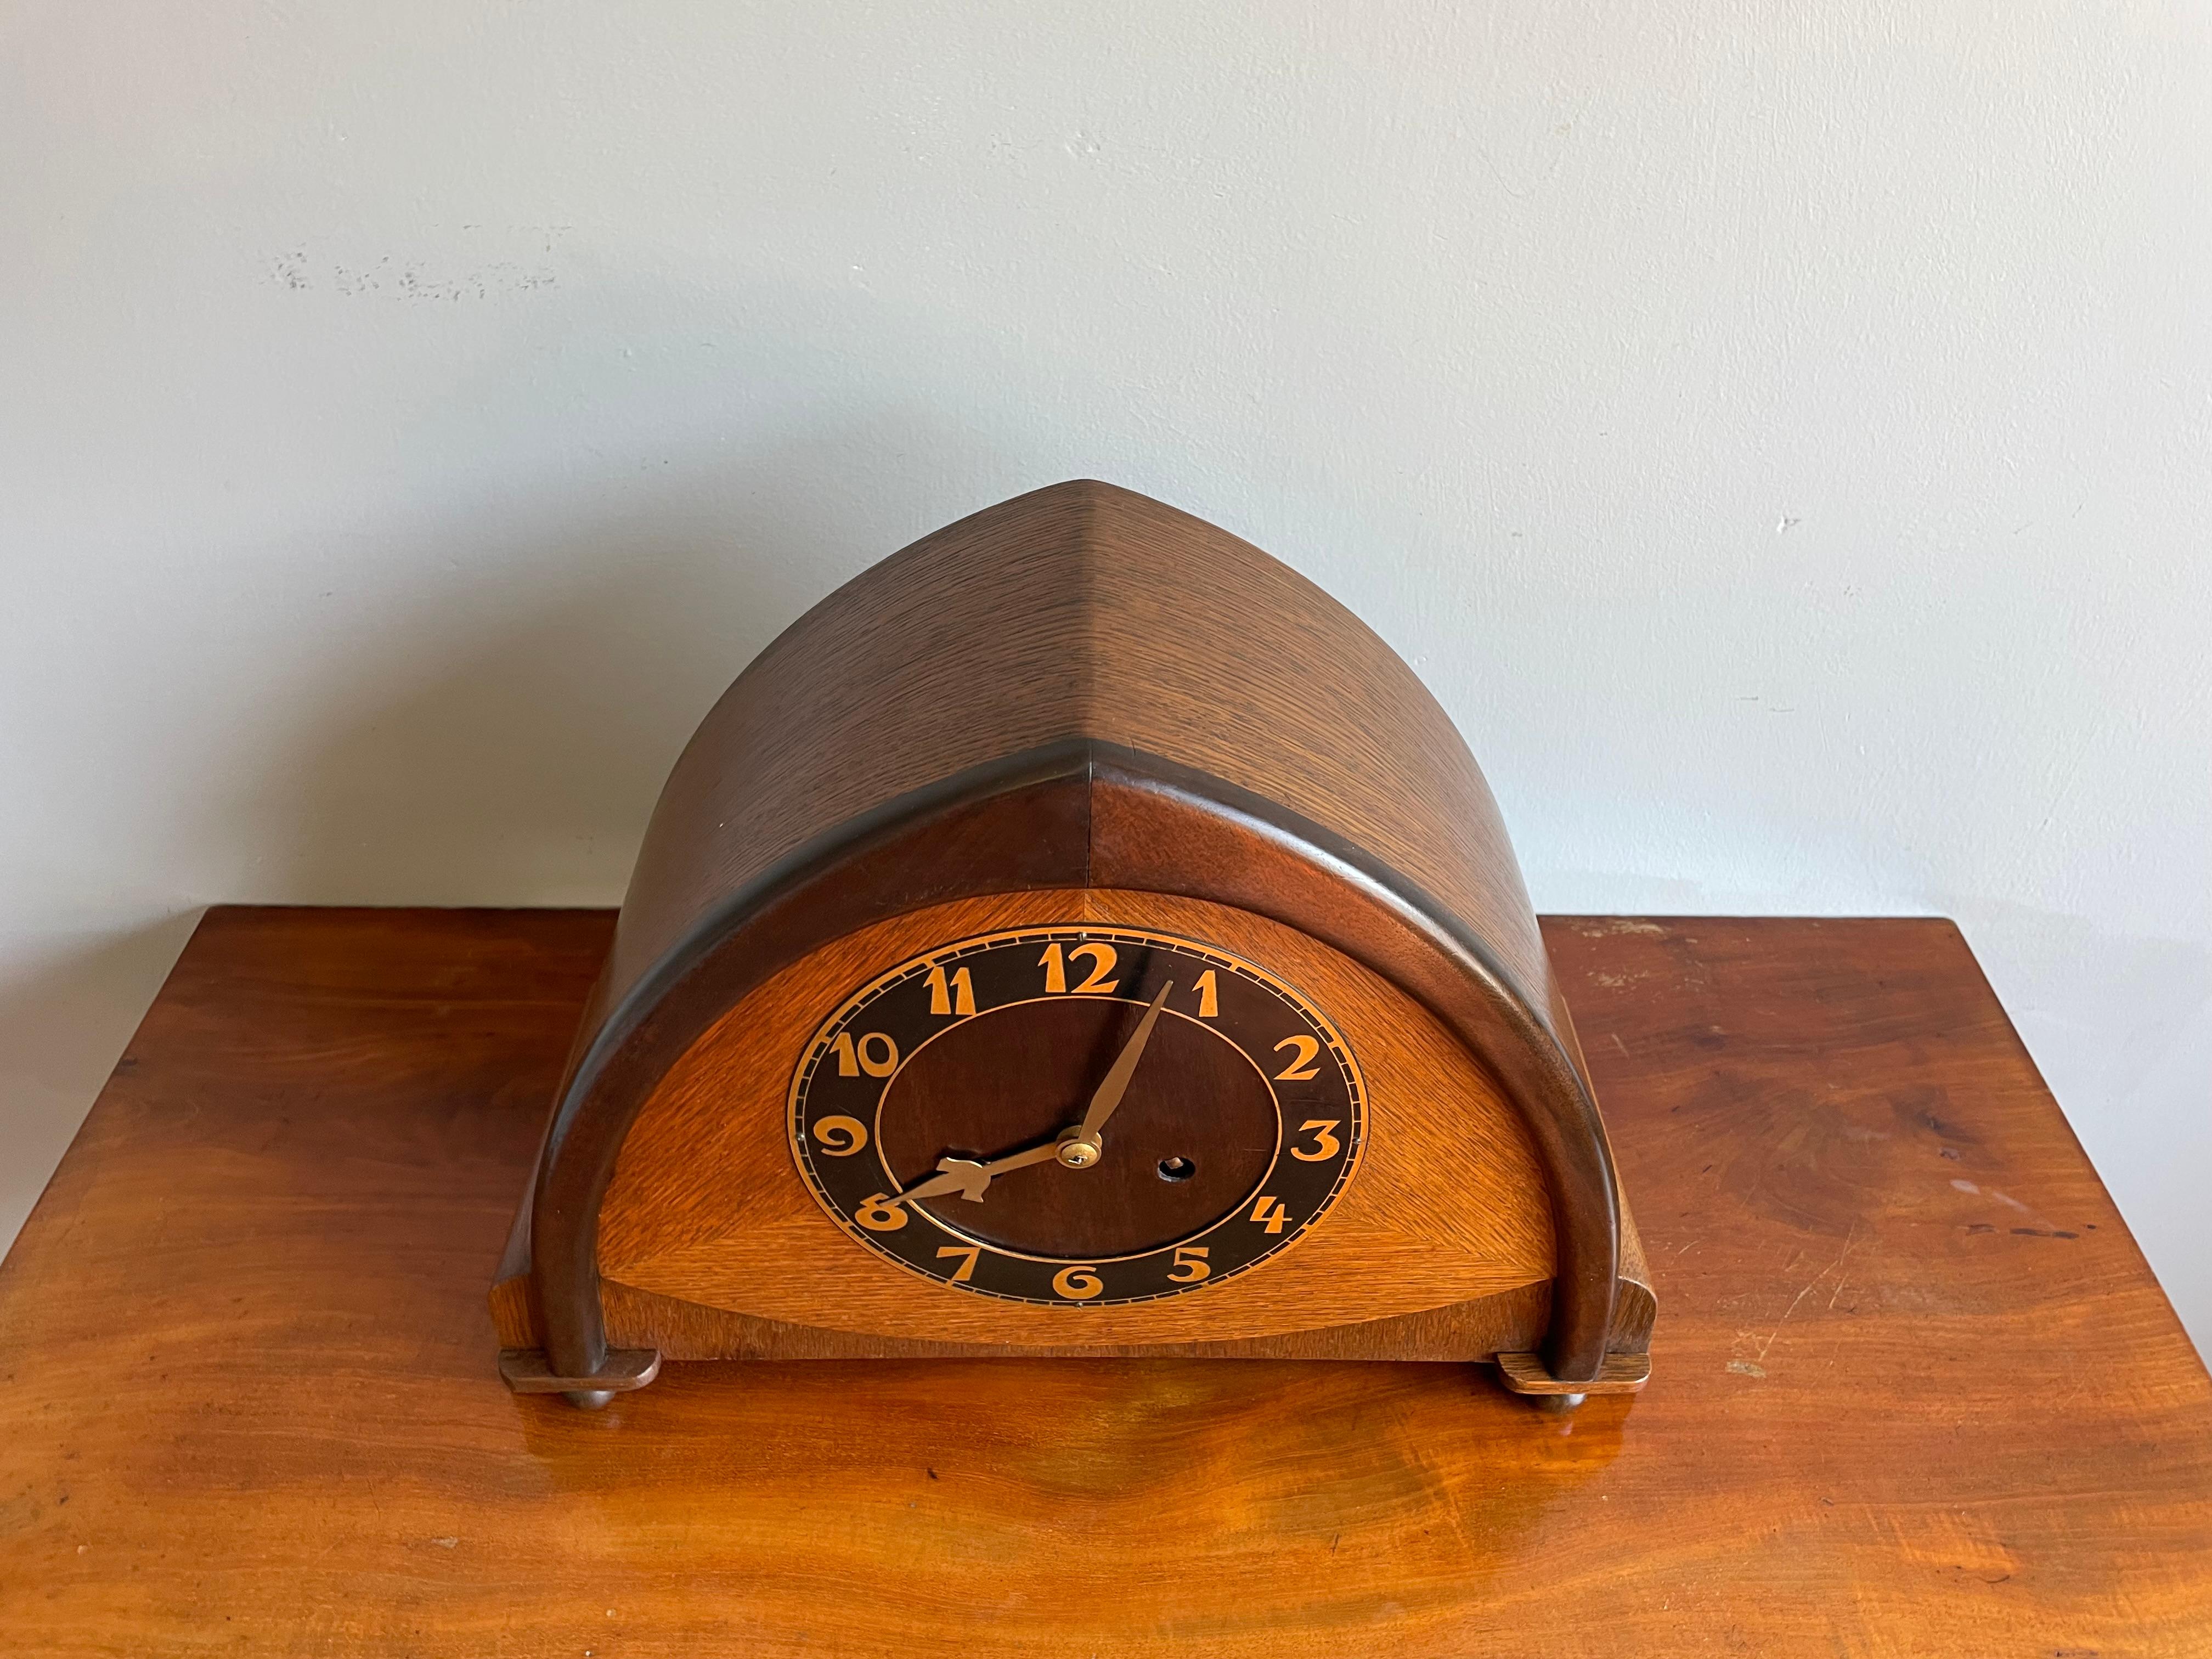 Dutch Arts & Crafts Wooden Mantle or Desk Clock w. Stunning Brass Dial Face 1915 For Sale 9